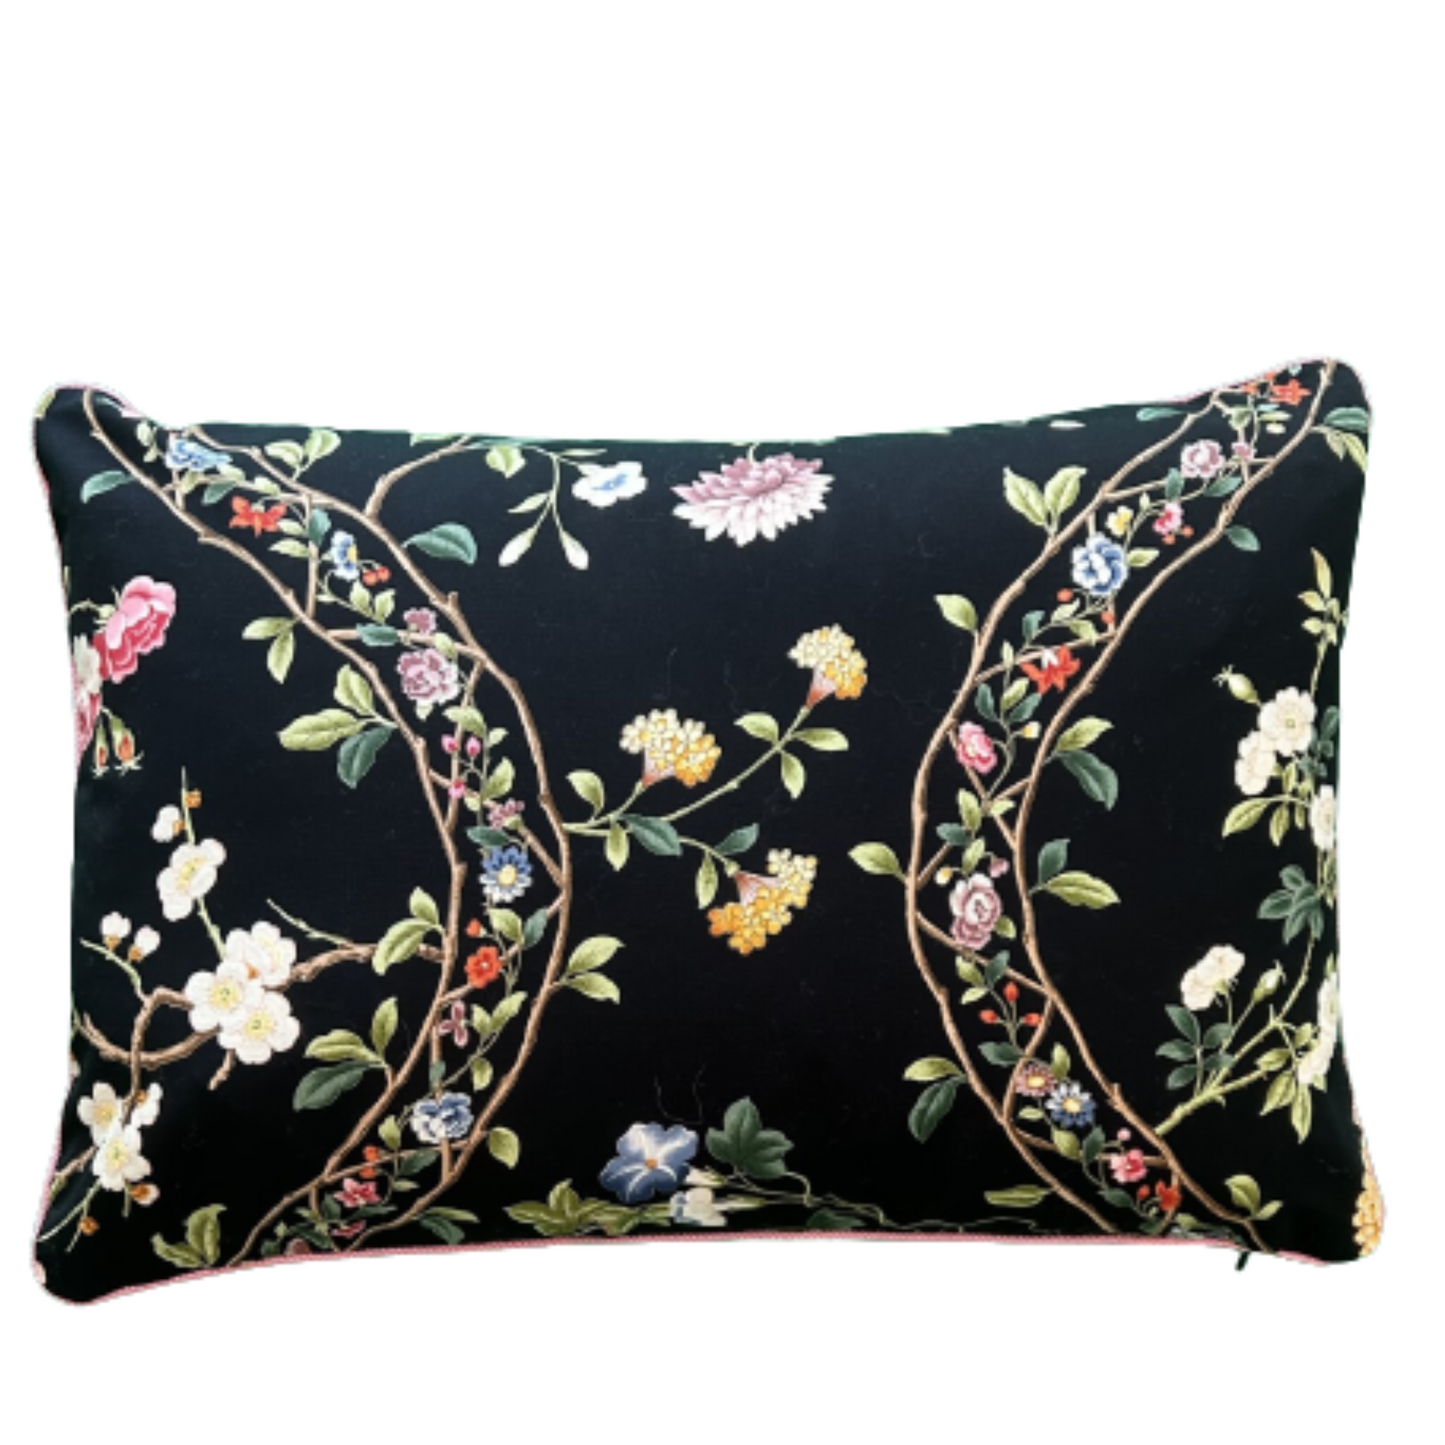 Silk Road Brunschwig Print 15 X 22 Decorative Pillow with Down Feather Insert